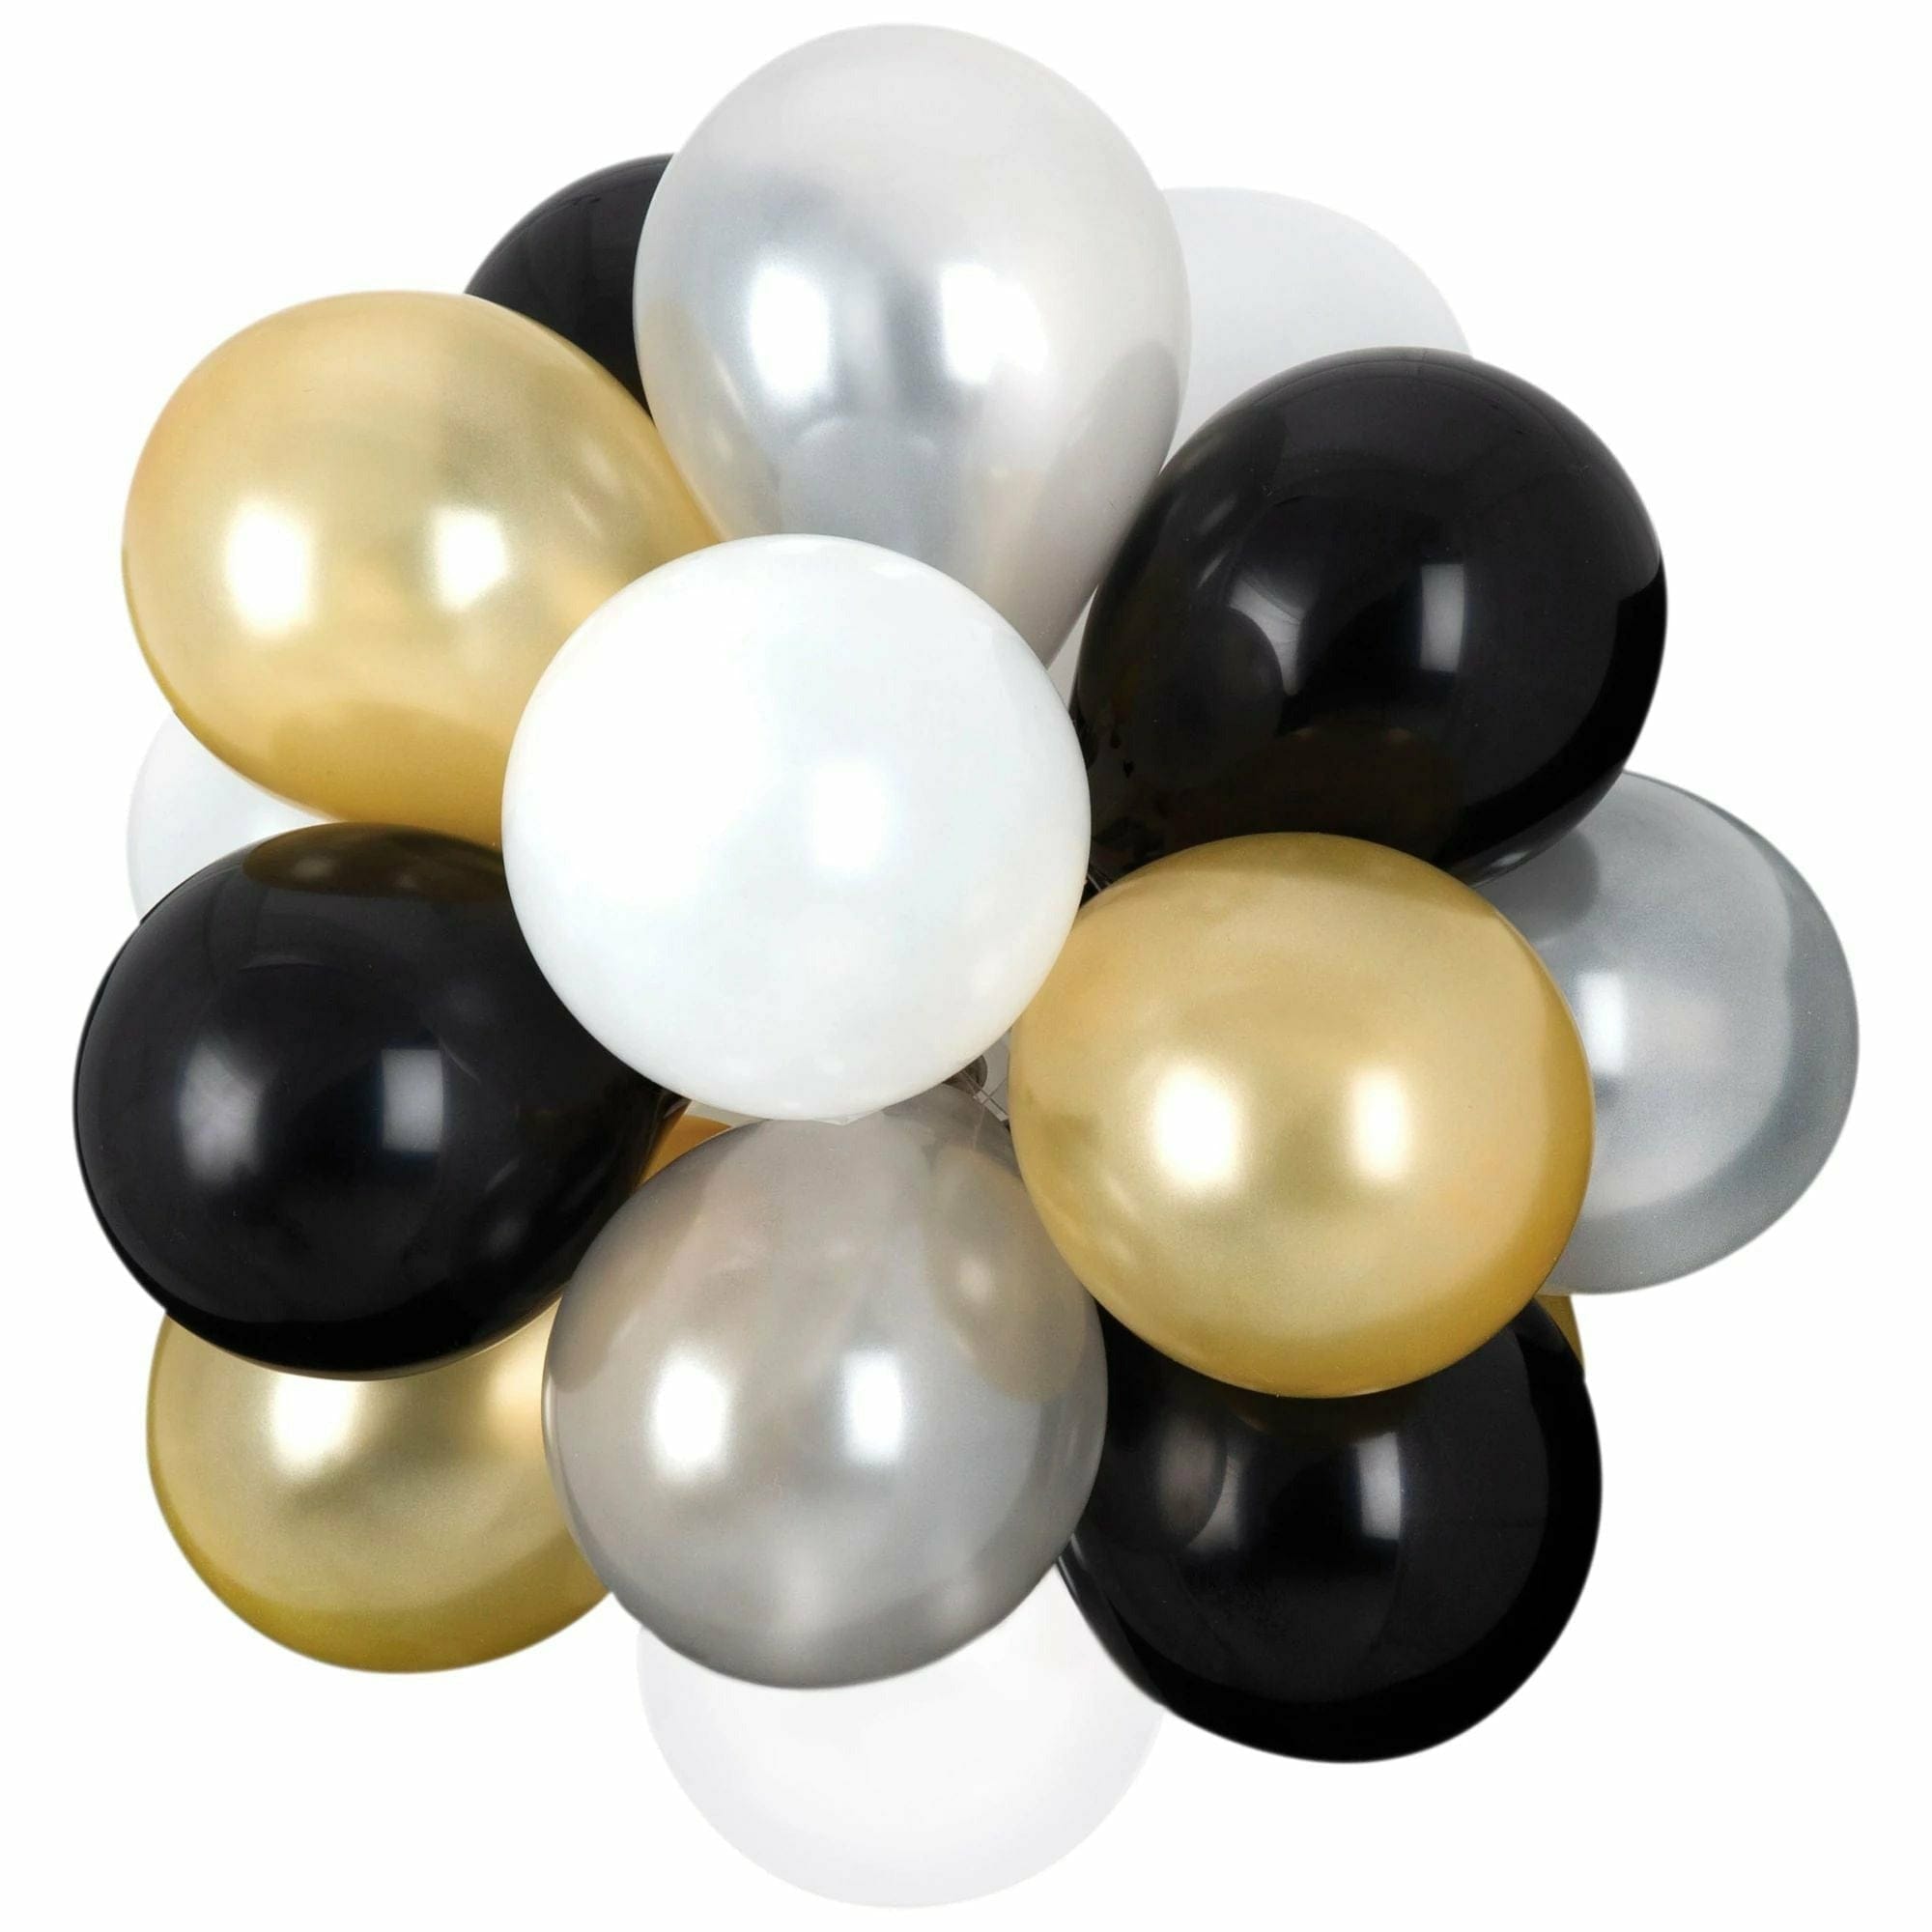 Gold, Black, Ultra Violet Balloon and Pearl Balloon with Reflects Isolated  on White Background. Birthday Ballon Set Stock Vector - Illustration of  satin, surprise: 226215883